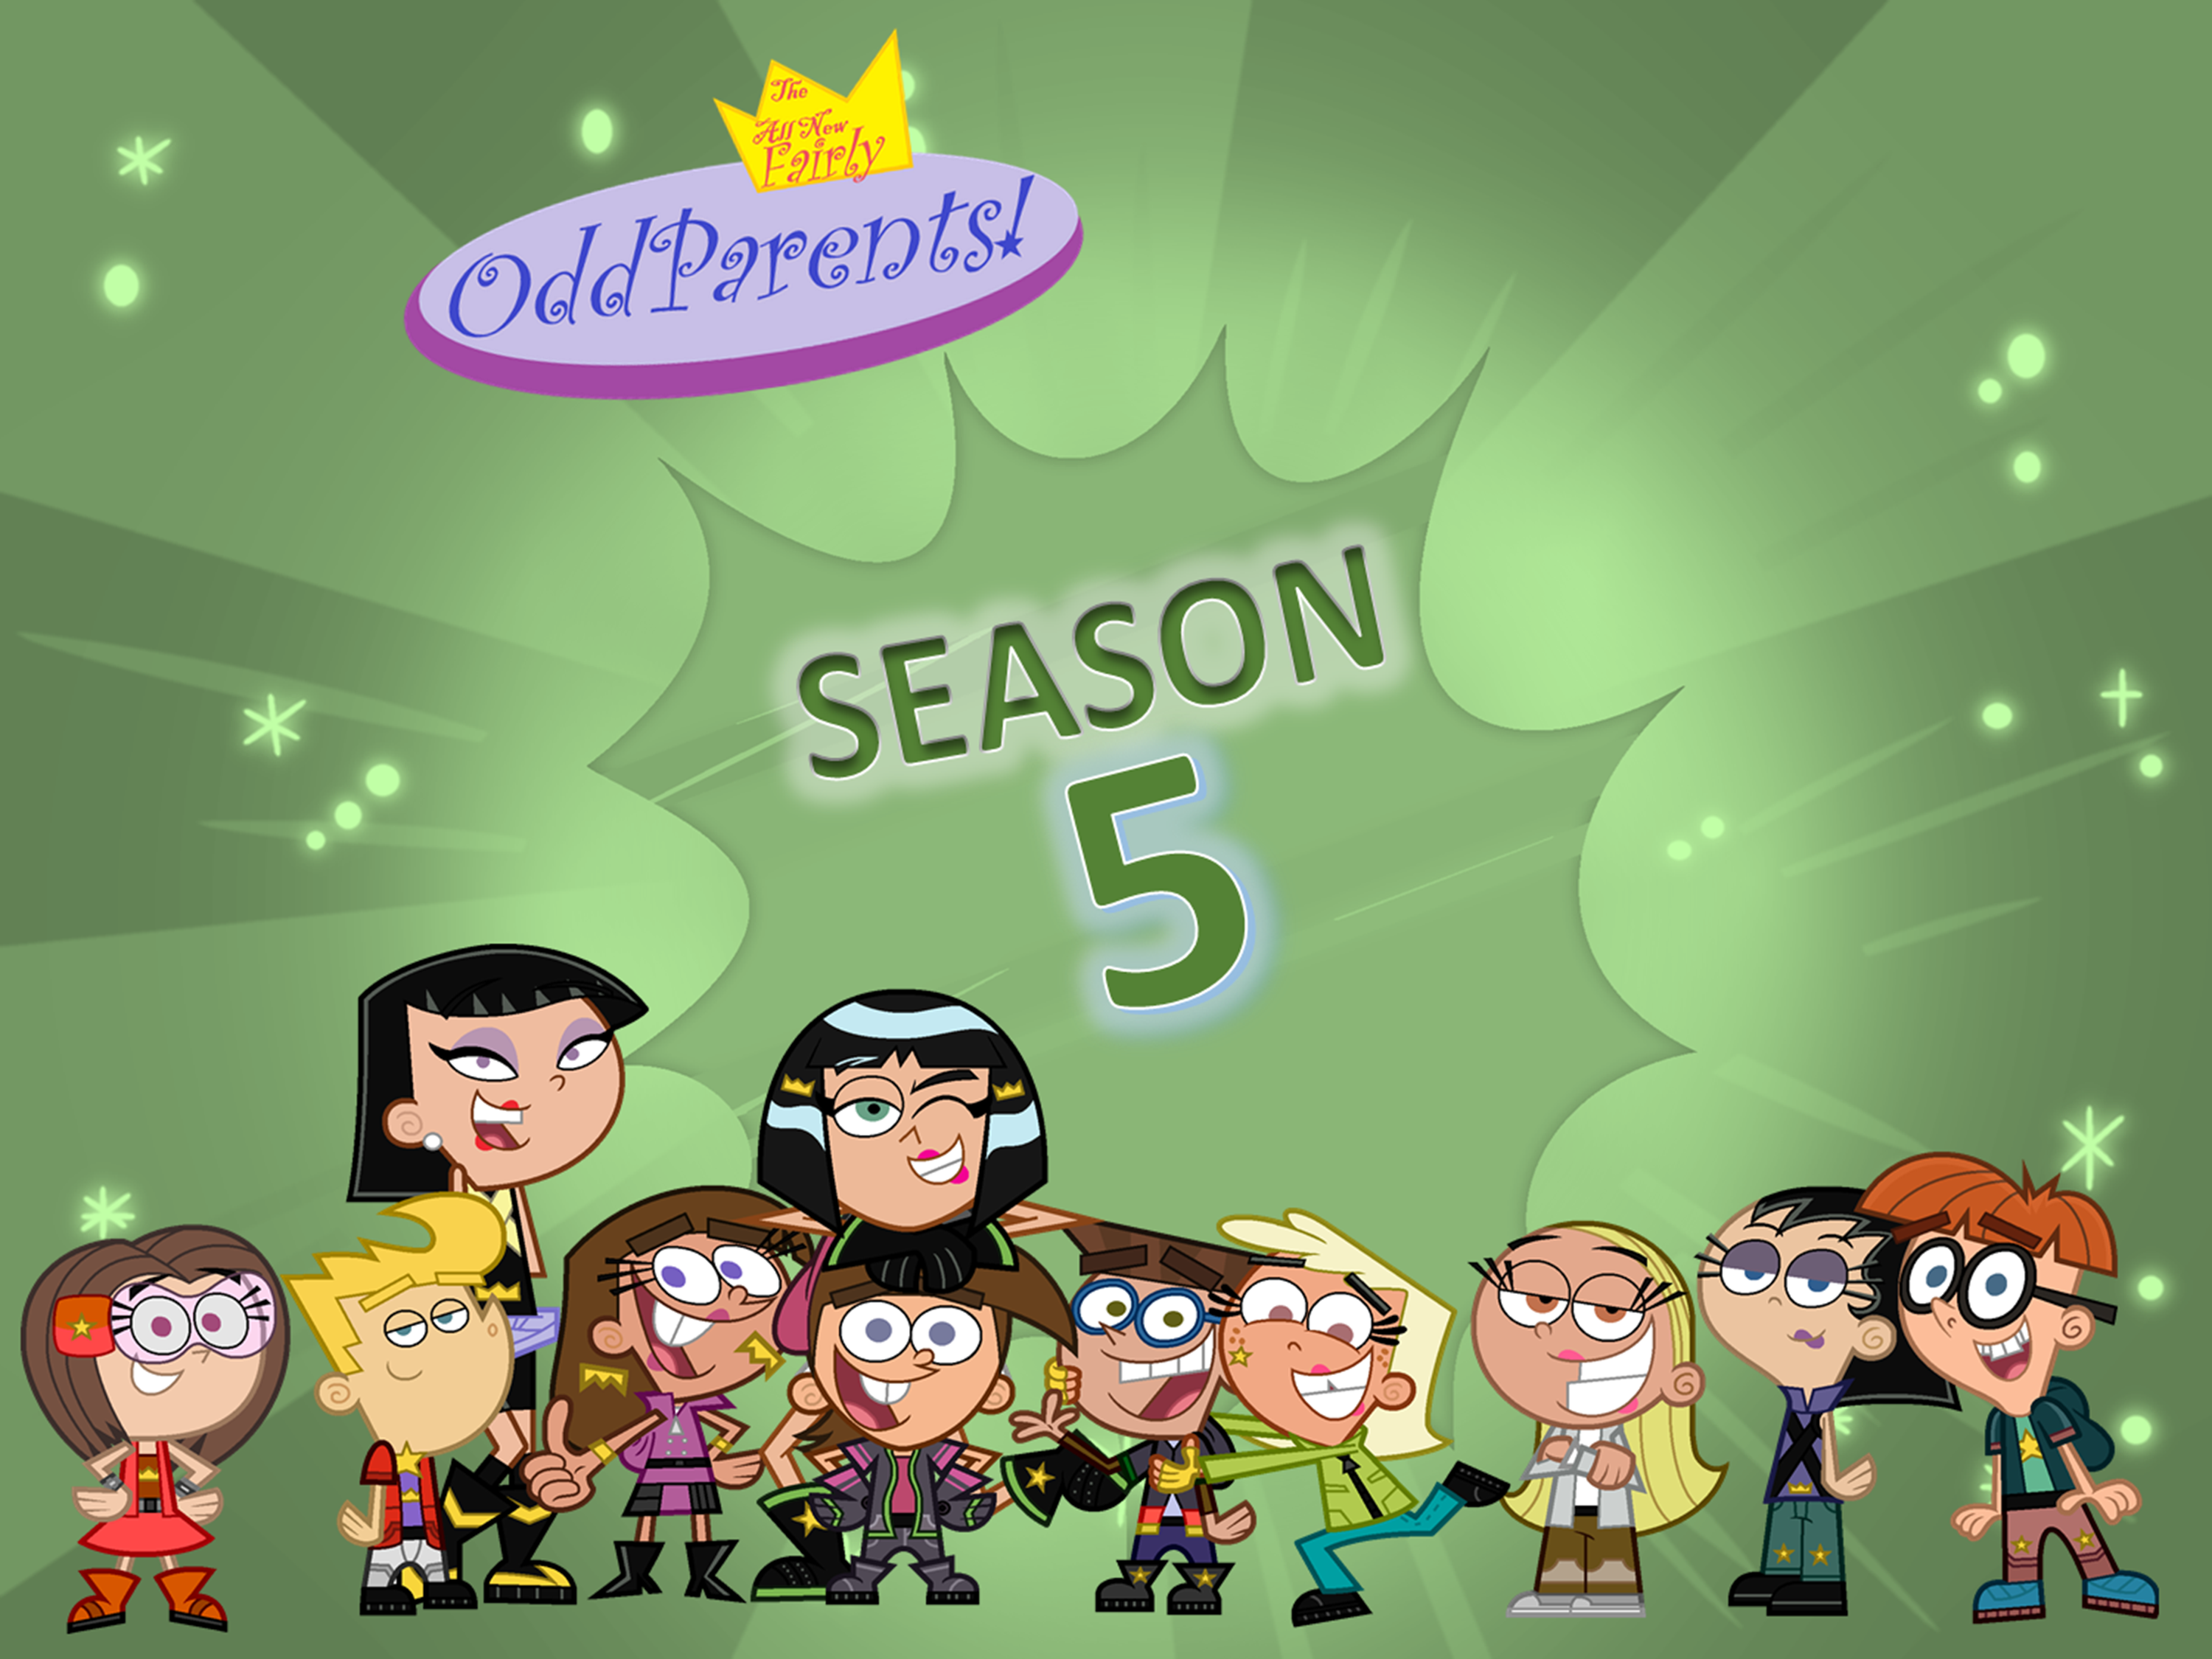 fairly odd parents series finale?